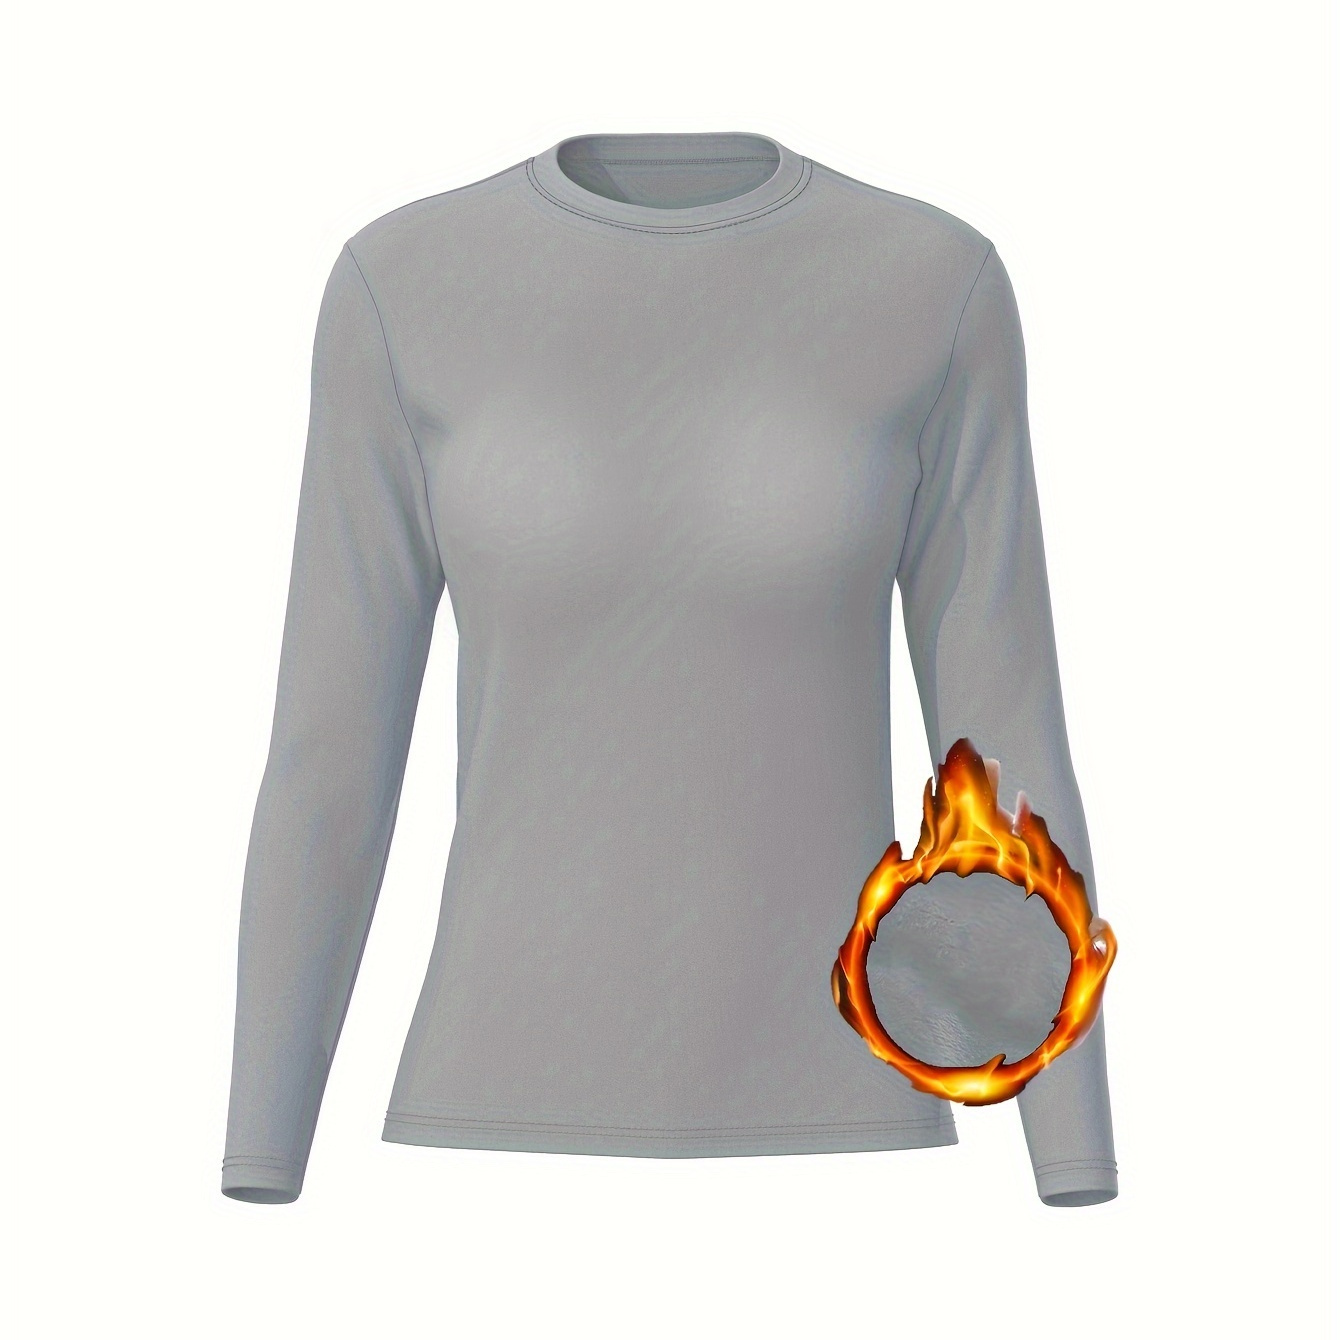 

Fleece Liner Comfy Sports T-shirt, Round Neck Long Sleeves Solid Color Sporty Tee, Women's Activewear